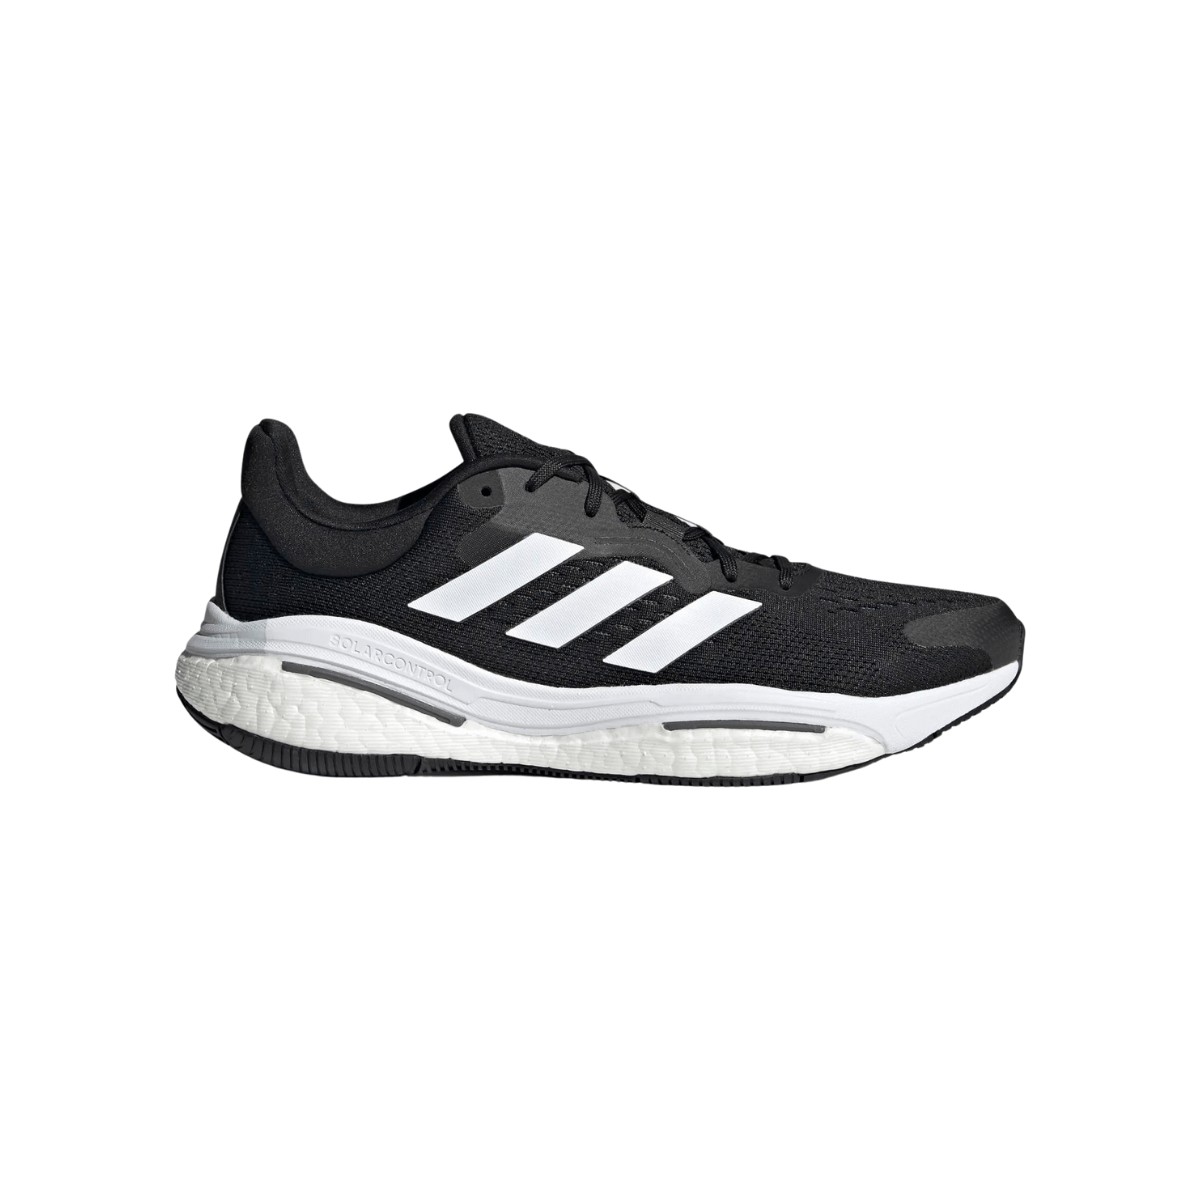 Chaussures Adidas Solarcontrol Noir Blanc AW22, Taille UK 7.5